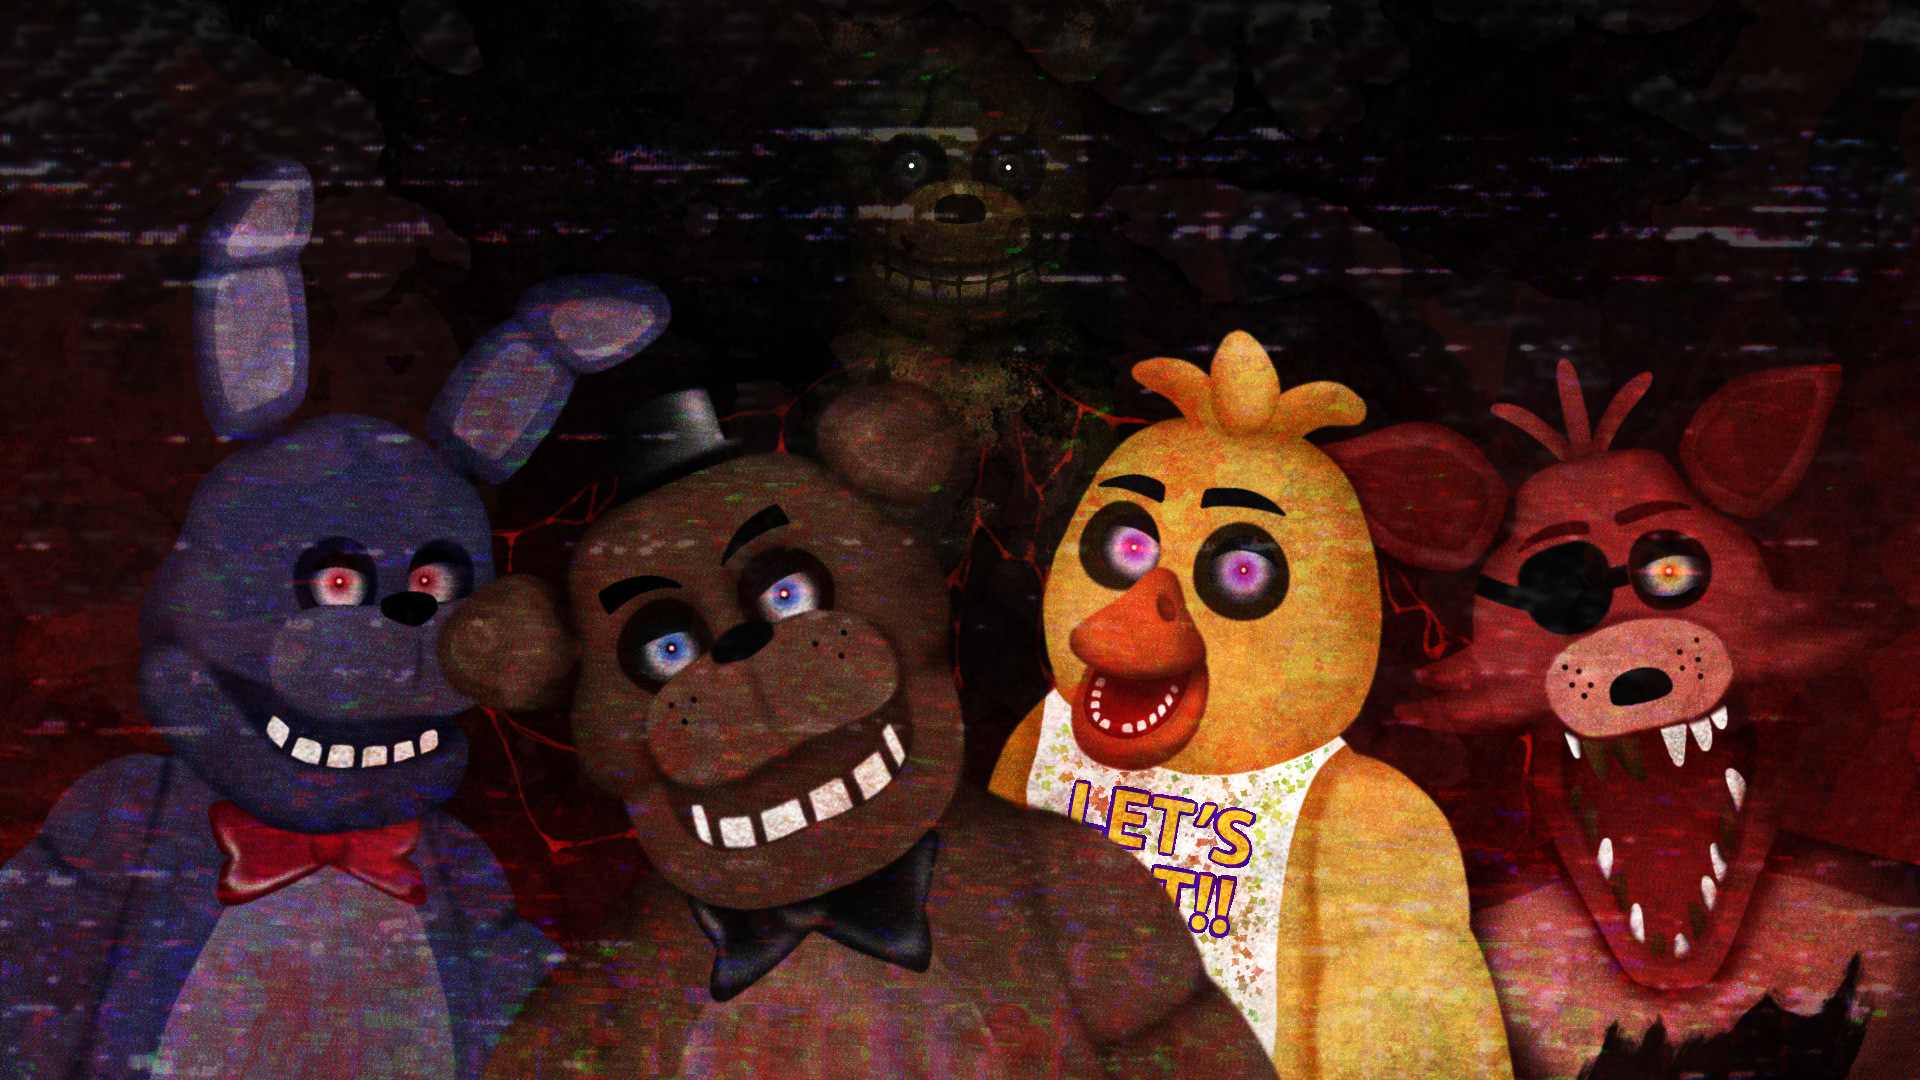 Rant and Rave: “Five Nights at Freddy’s” bites off more than it can chew